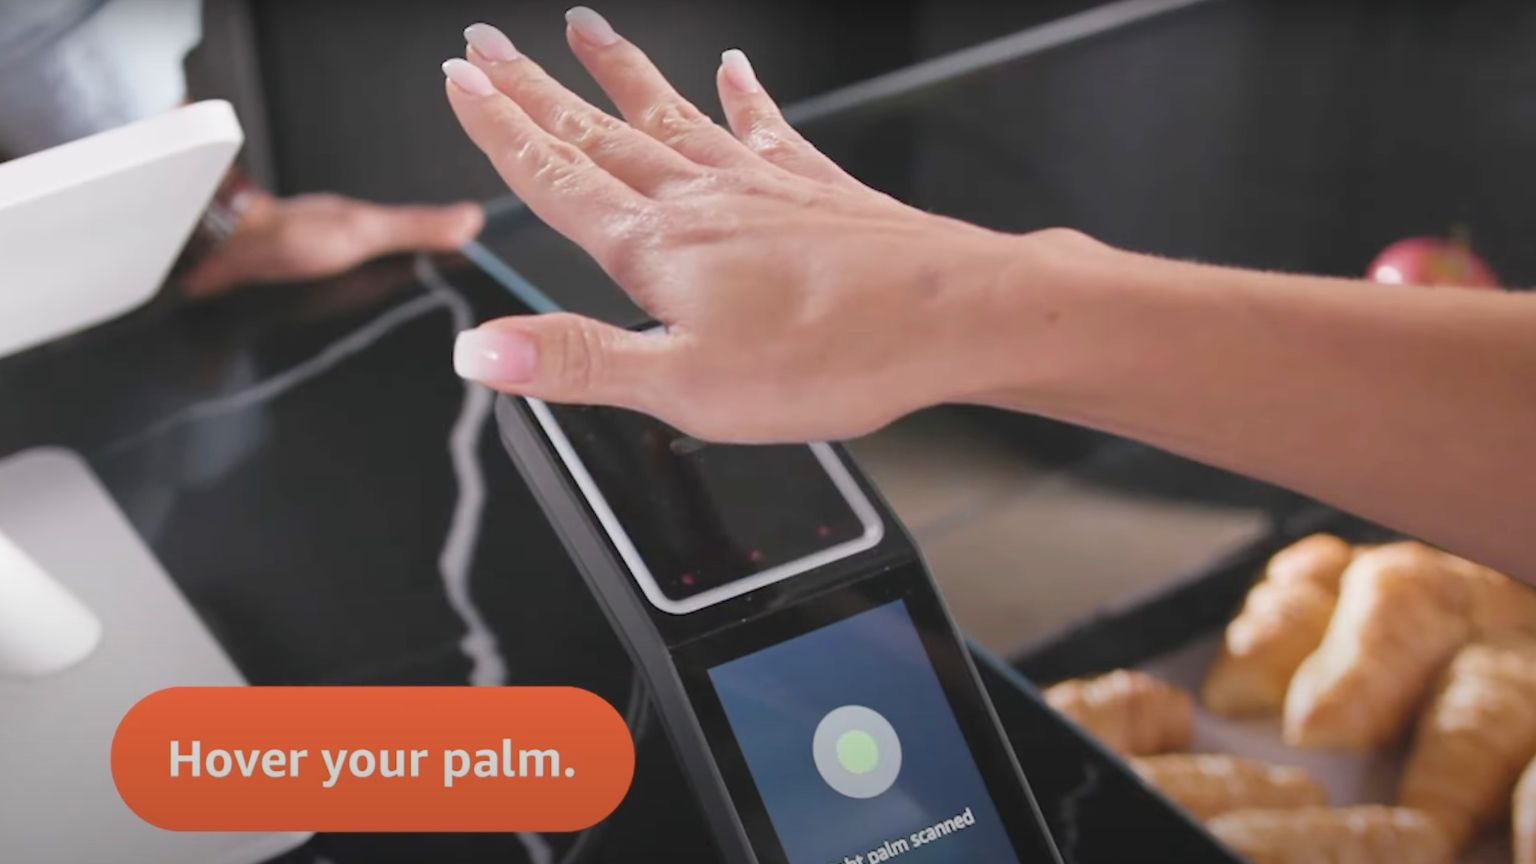 Trading Privacy For Convenience: Starbucks’ Biometric Experiment With Palm Payments In Washington Town